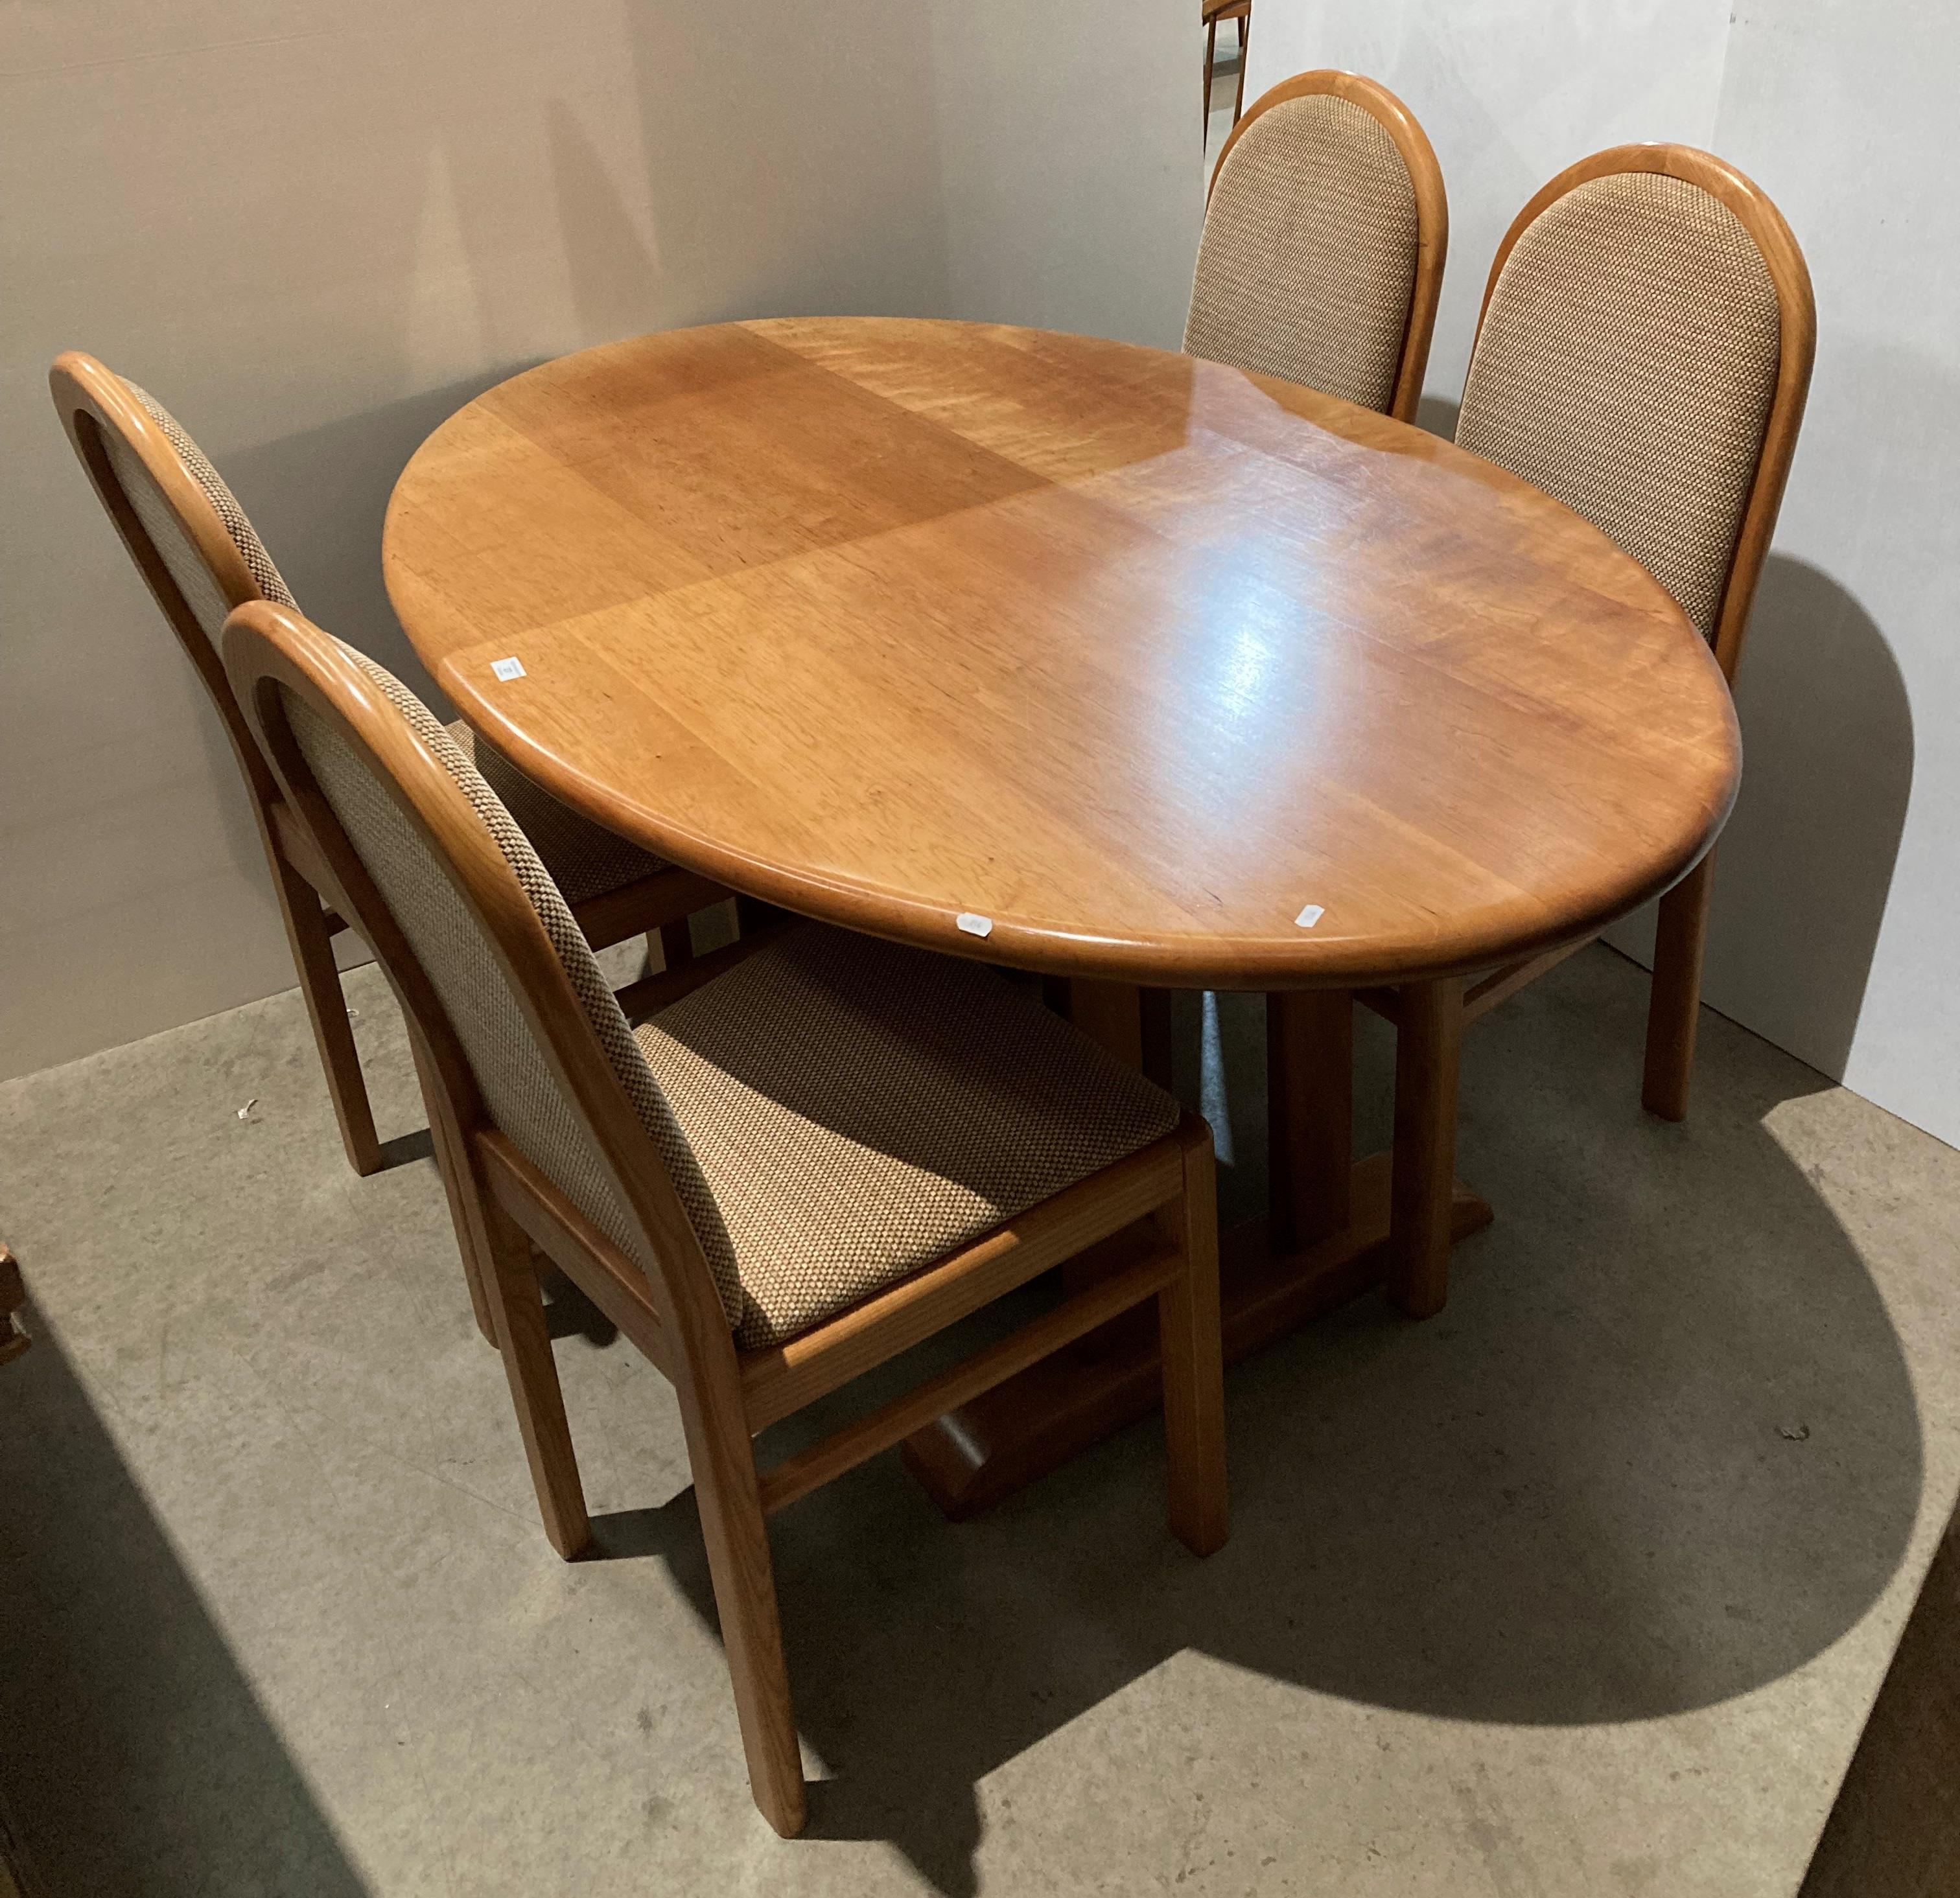 Light oak oval dining table and four chairs with light brown patterned fabric,